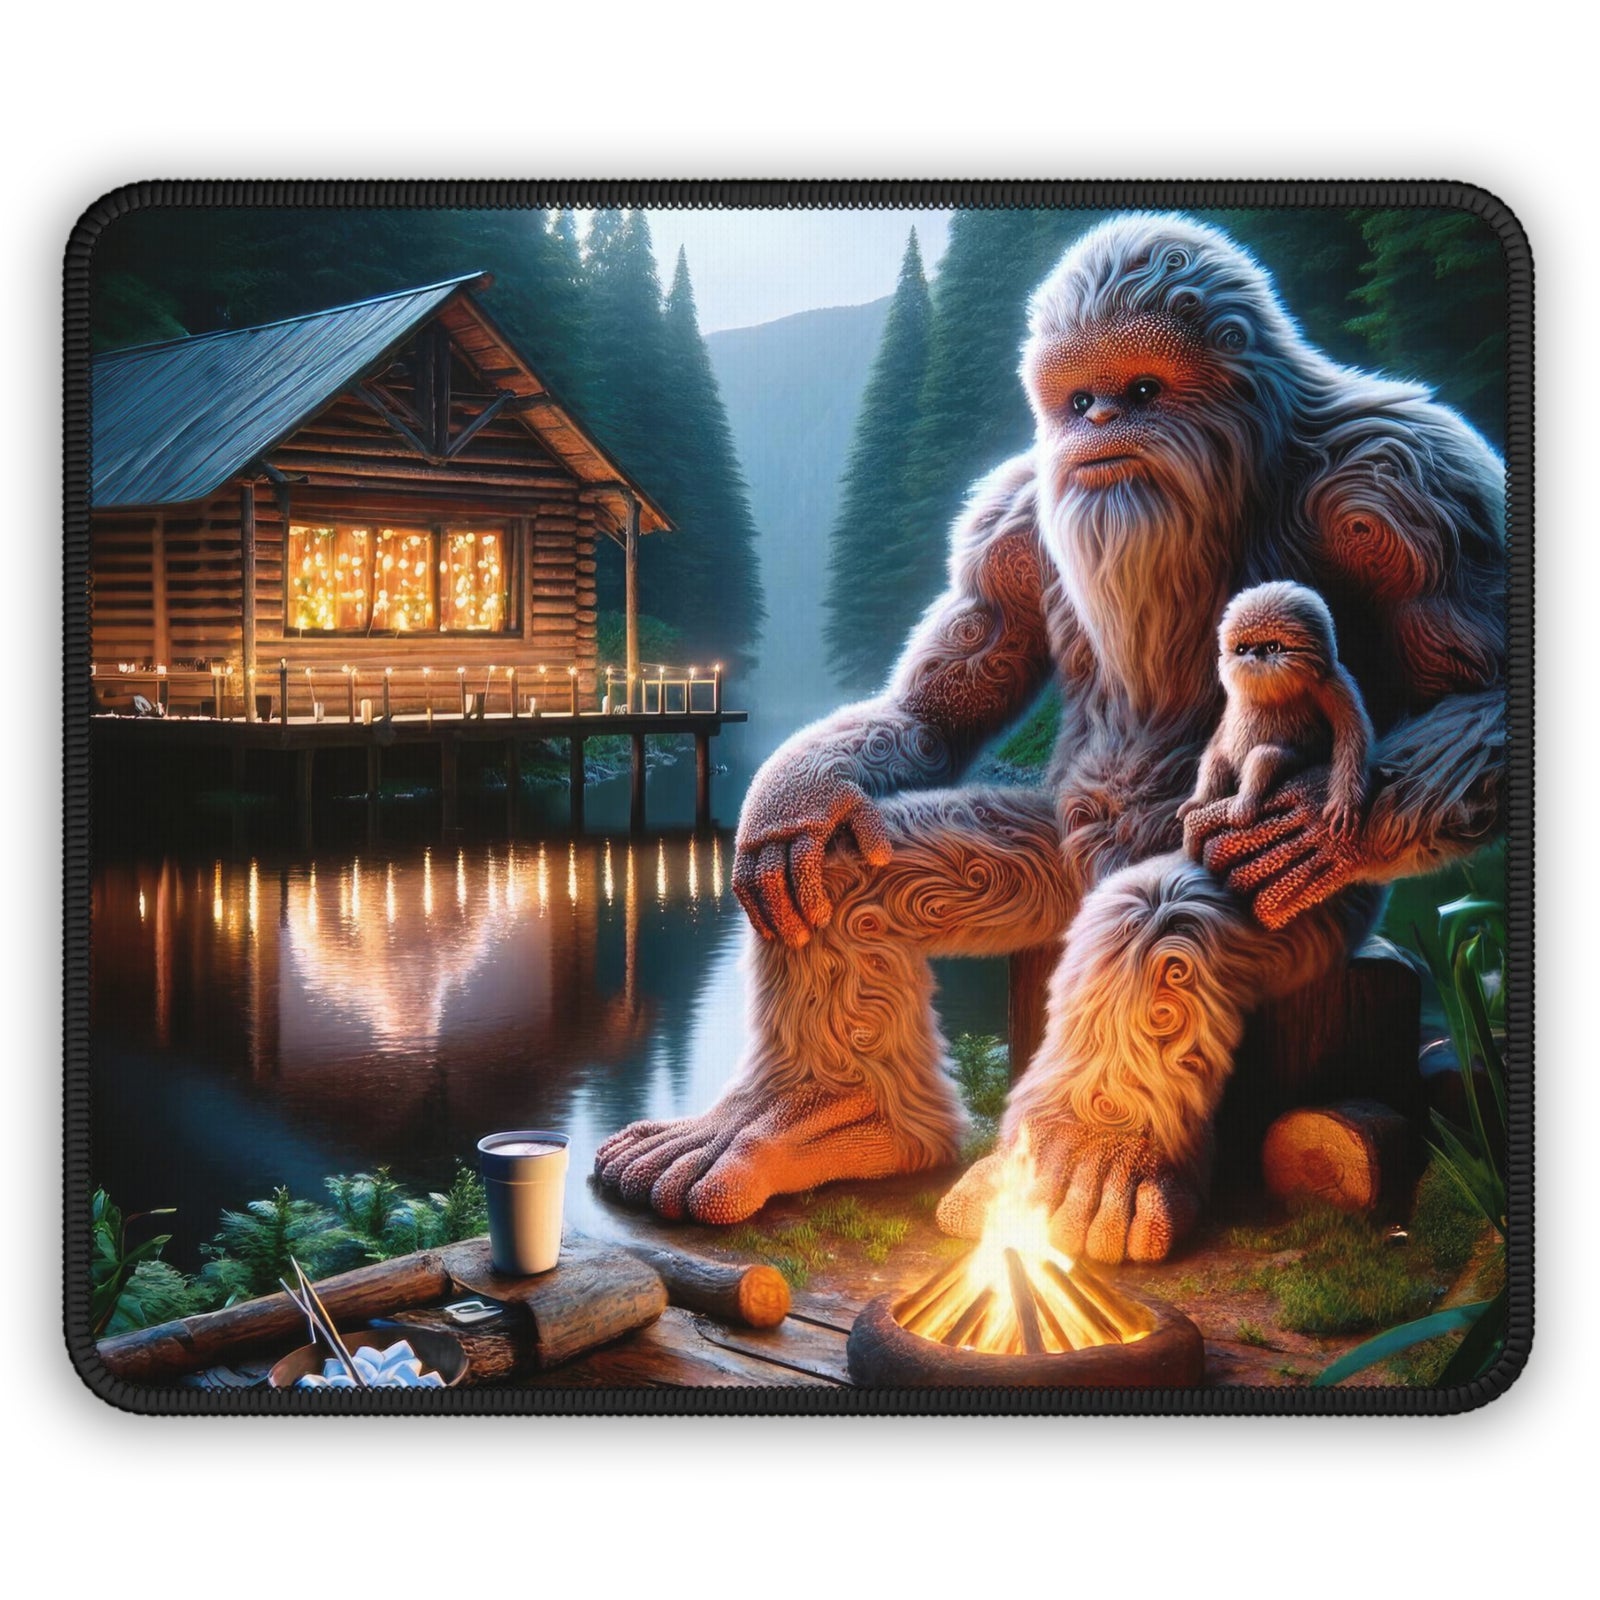 Twilight Tales Gaming Mouse Pad